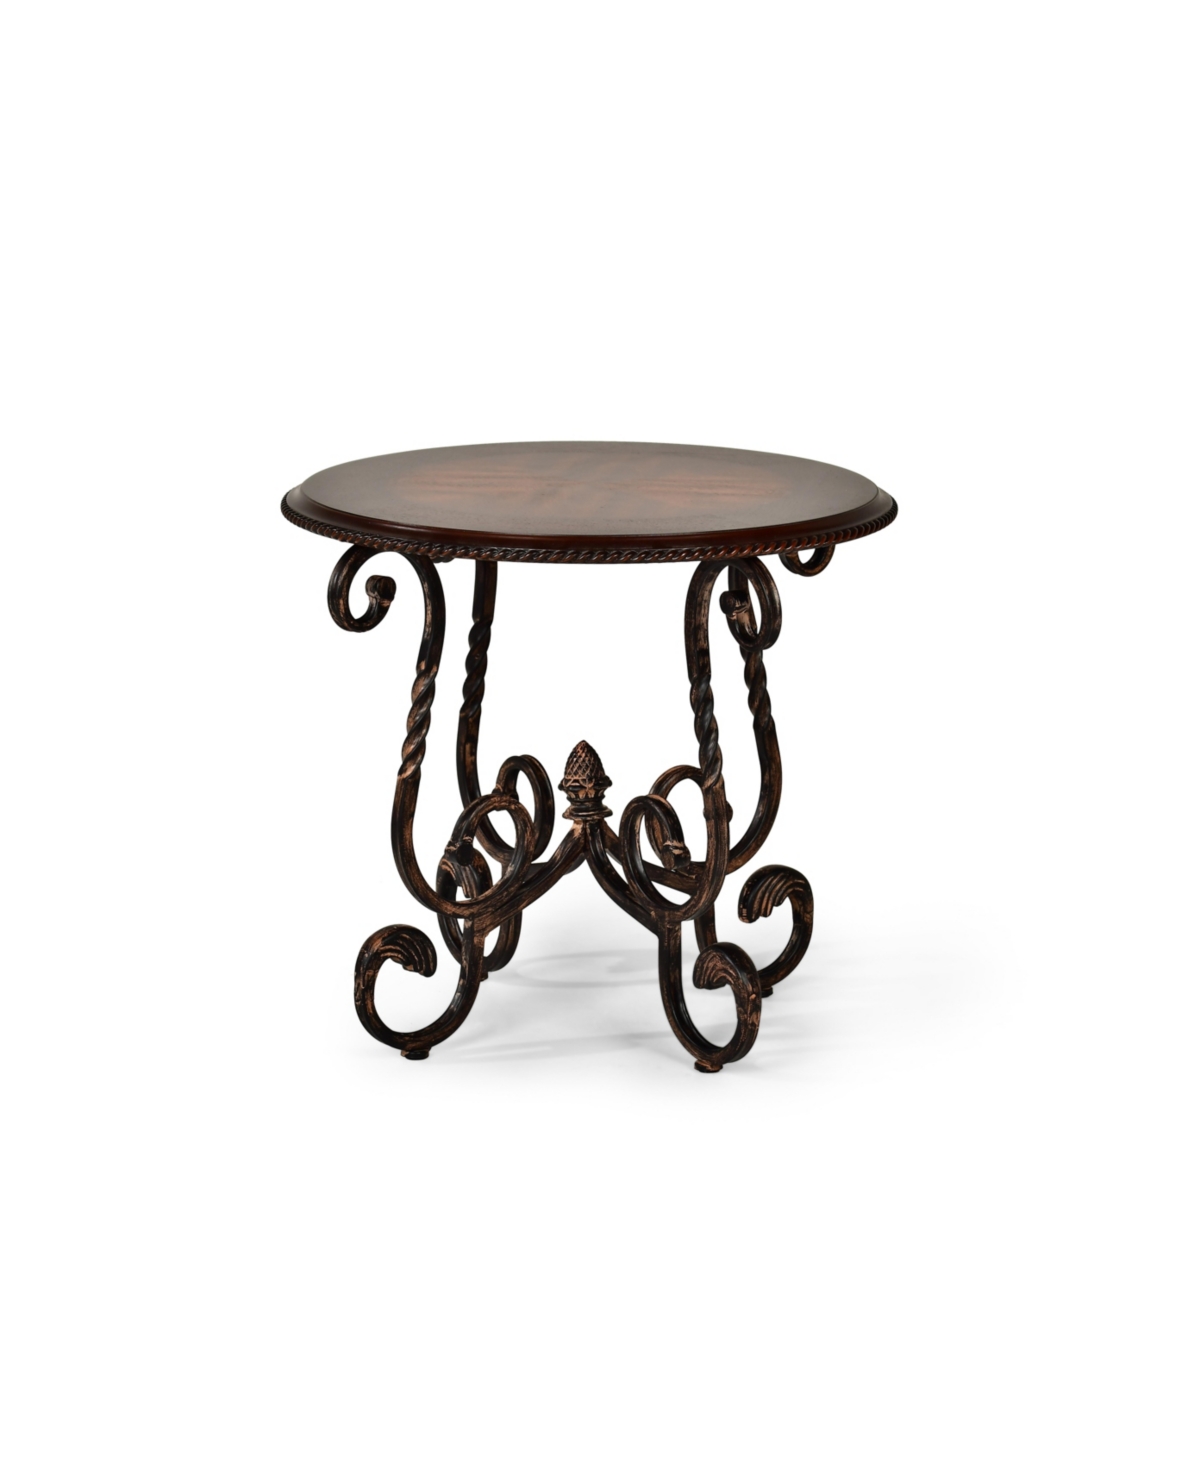 Steve Silver Crowley 26" Round Wood And Metal Tuscan Style End Table In Dark Cherry Finish With Hand Applied Bur